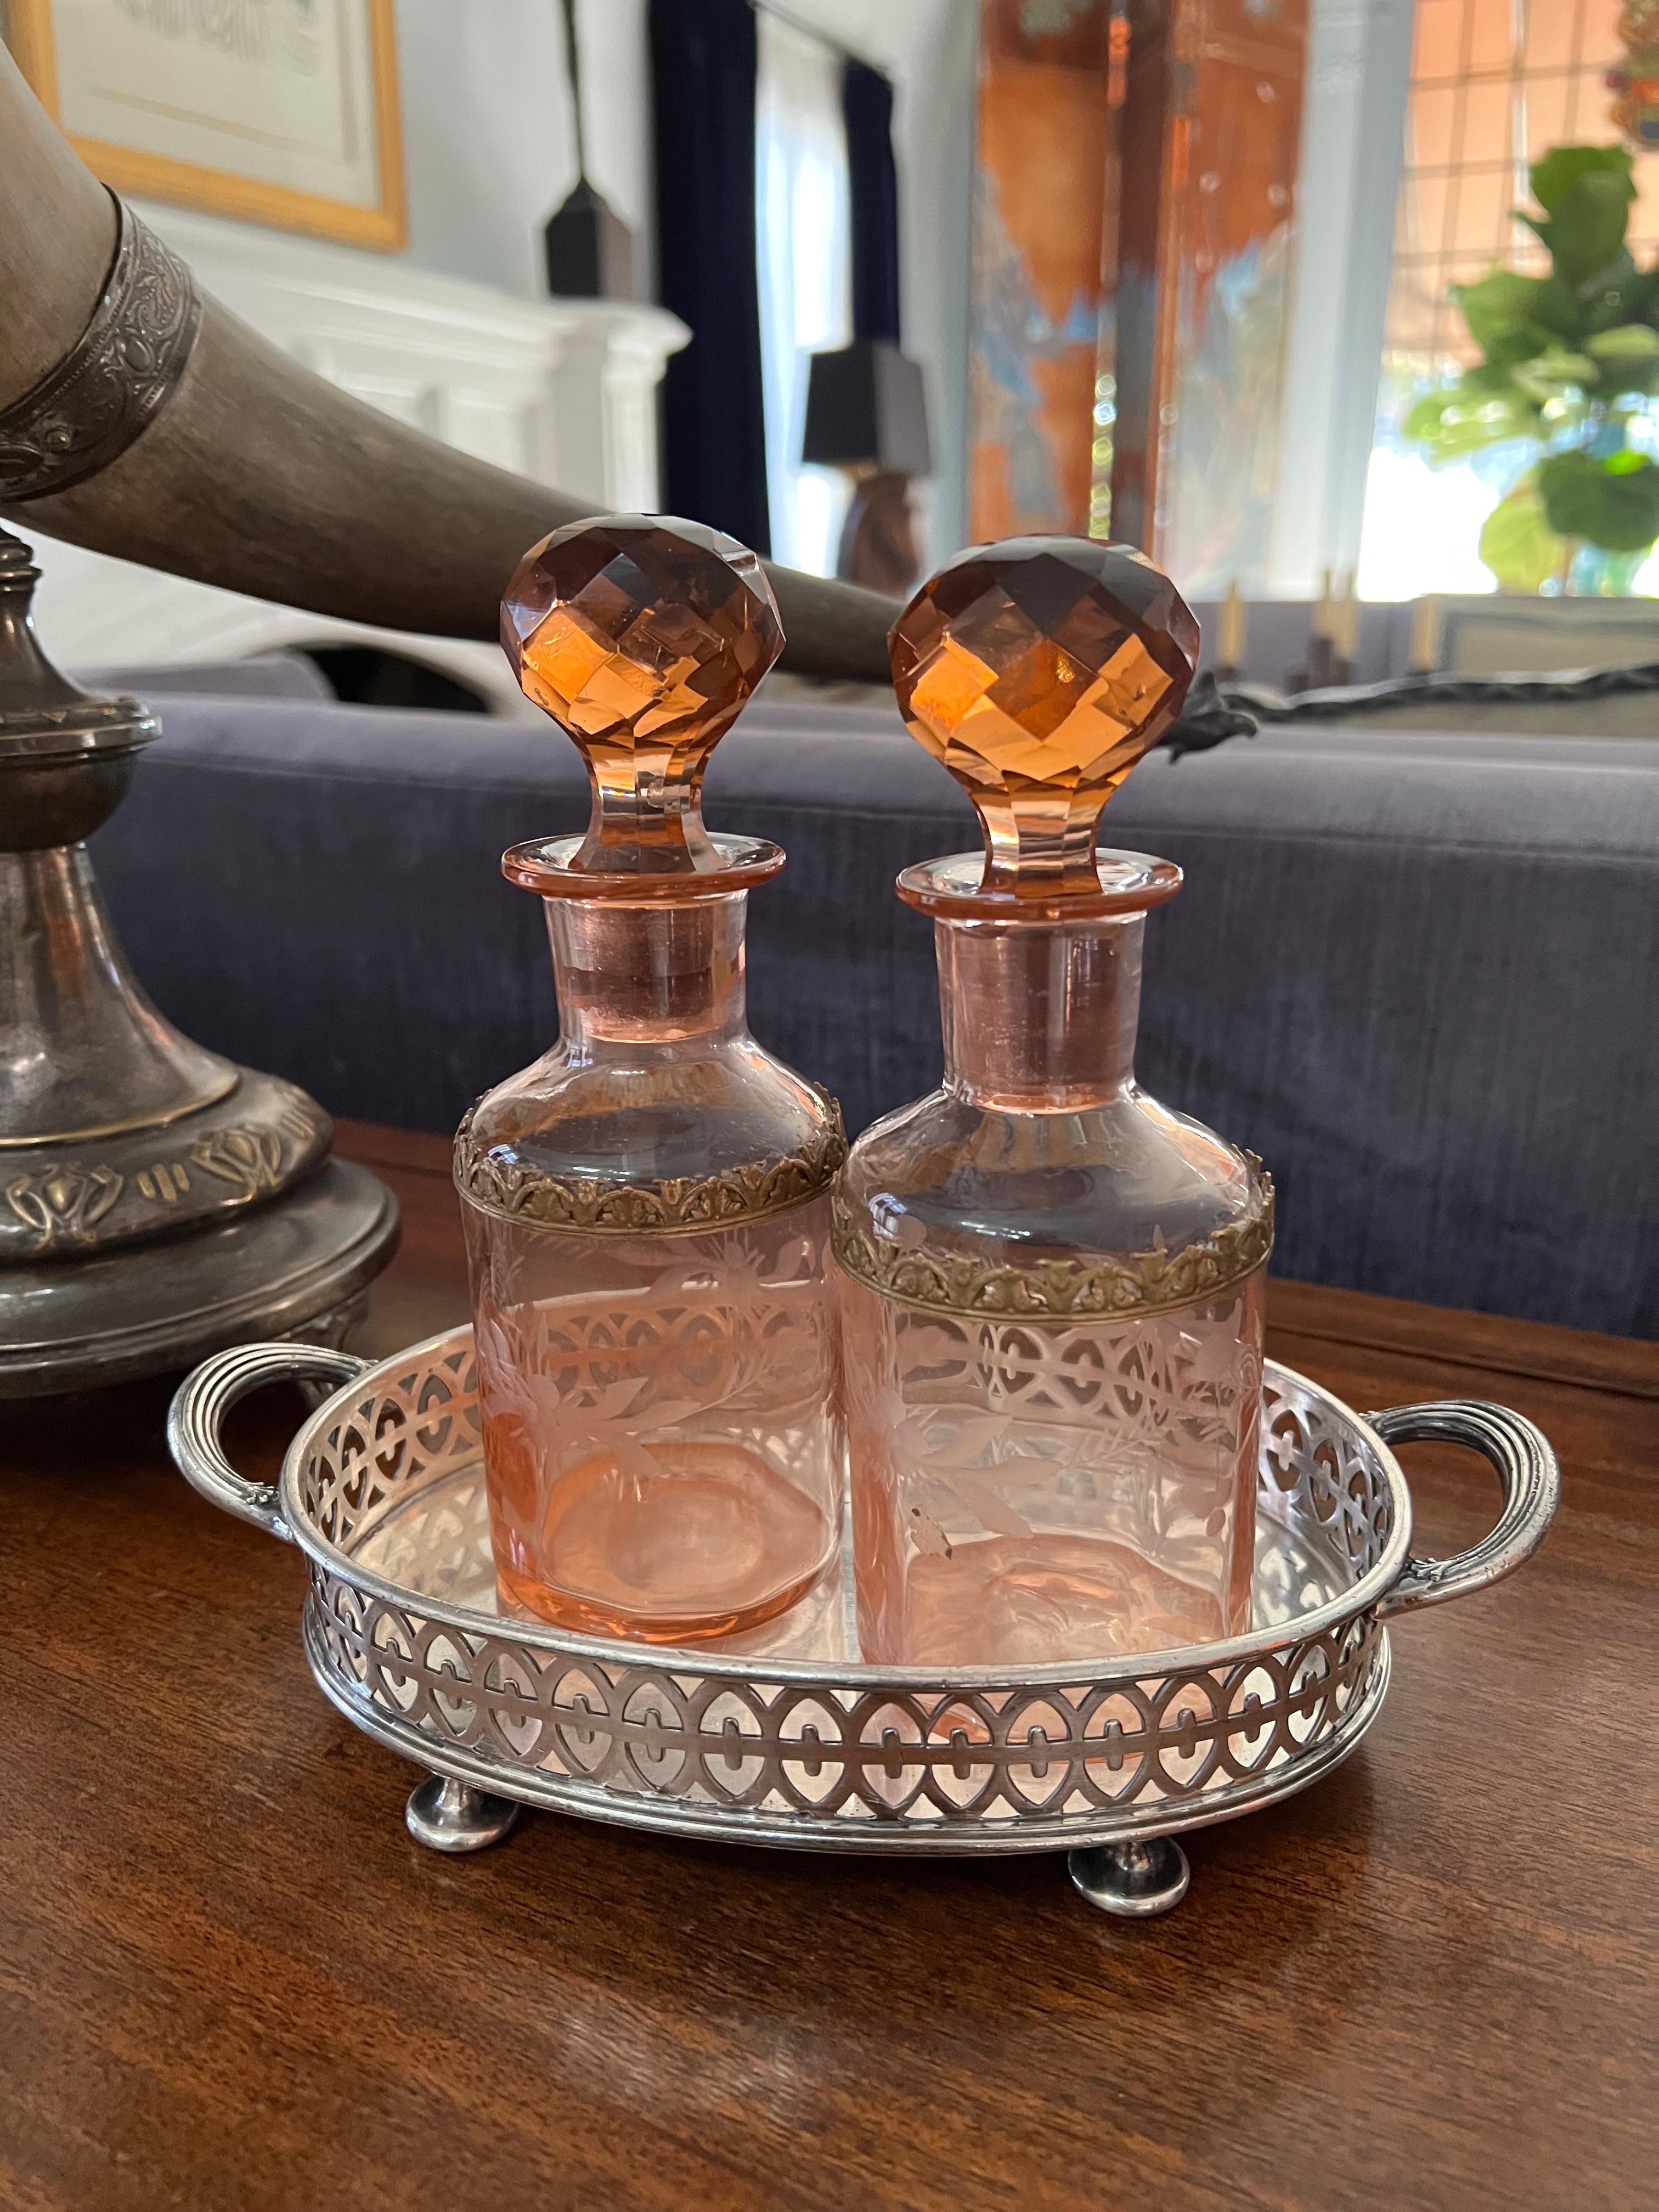 Pair of Amber Cut Crystal Art Deco, art Nouveau Decanters. The pair are unique in color and size a compliment to the vanity for perfumes, scents, for the bath or even mouthwash (perhaps hers and hers). Likely Art Deco or 

Wonderfully decorative